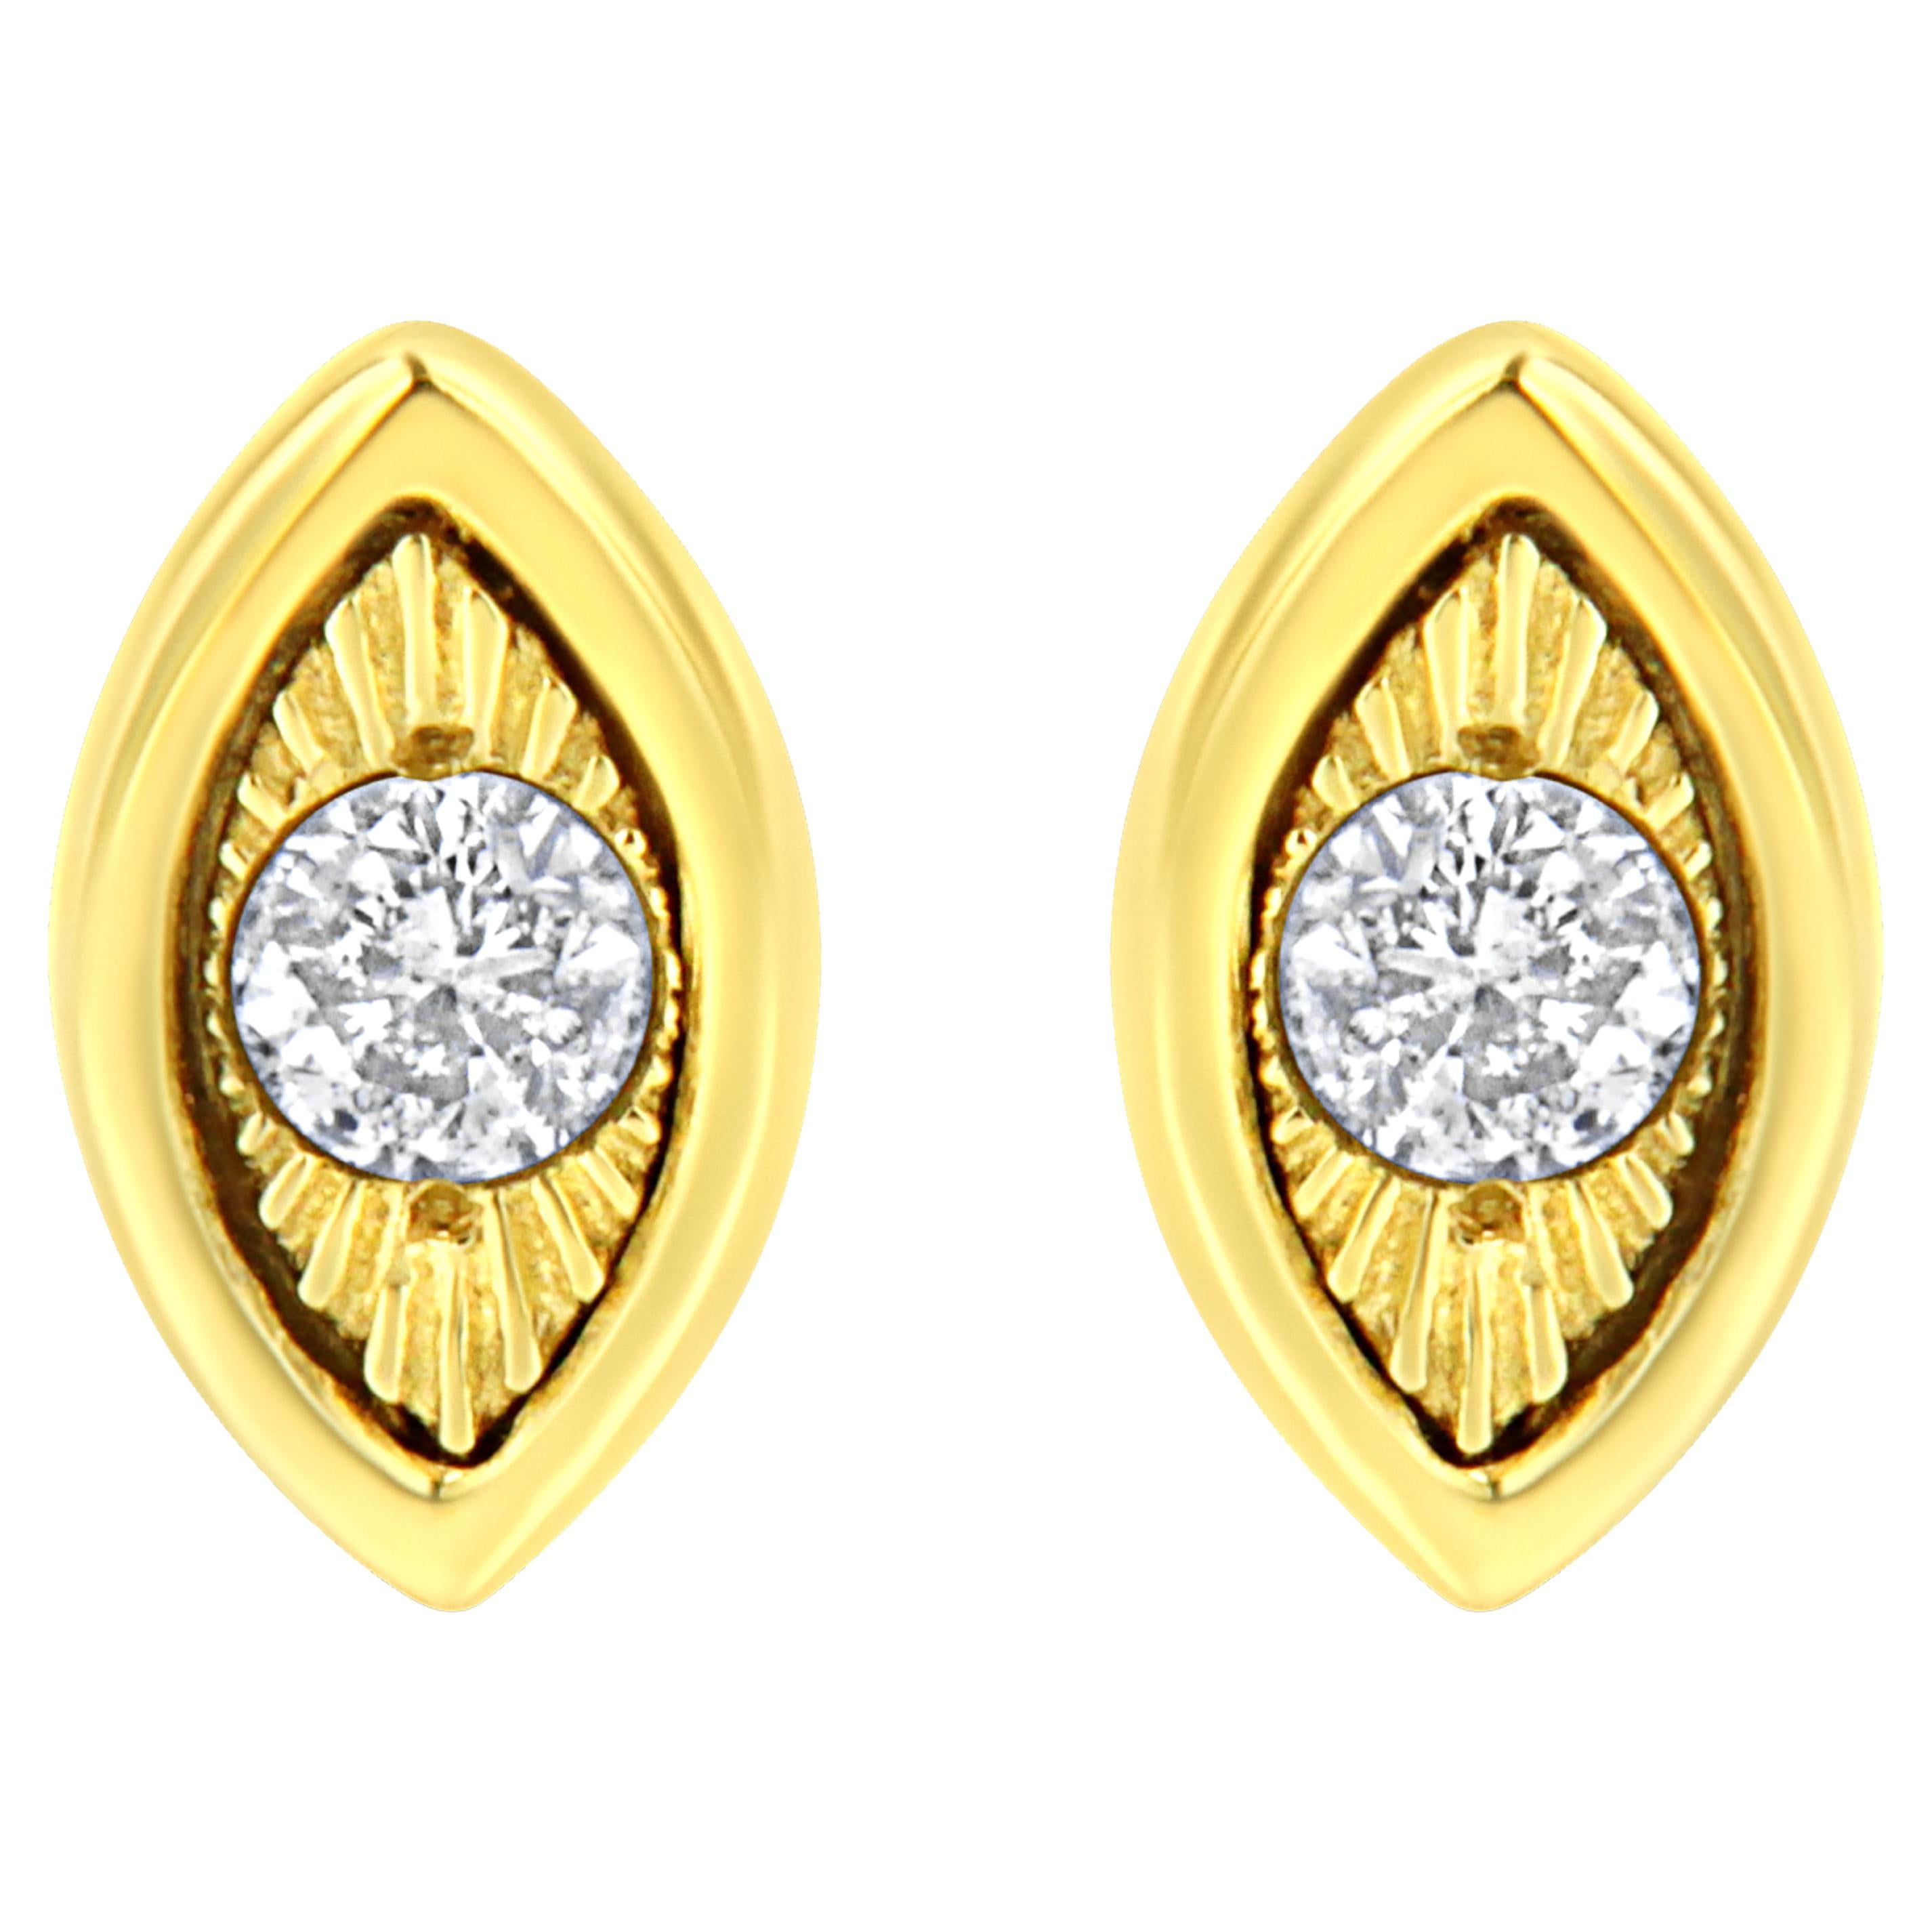 Yellow Gold Plated Sterling Silver 1/10 Carat Diamond Stud Earrings